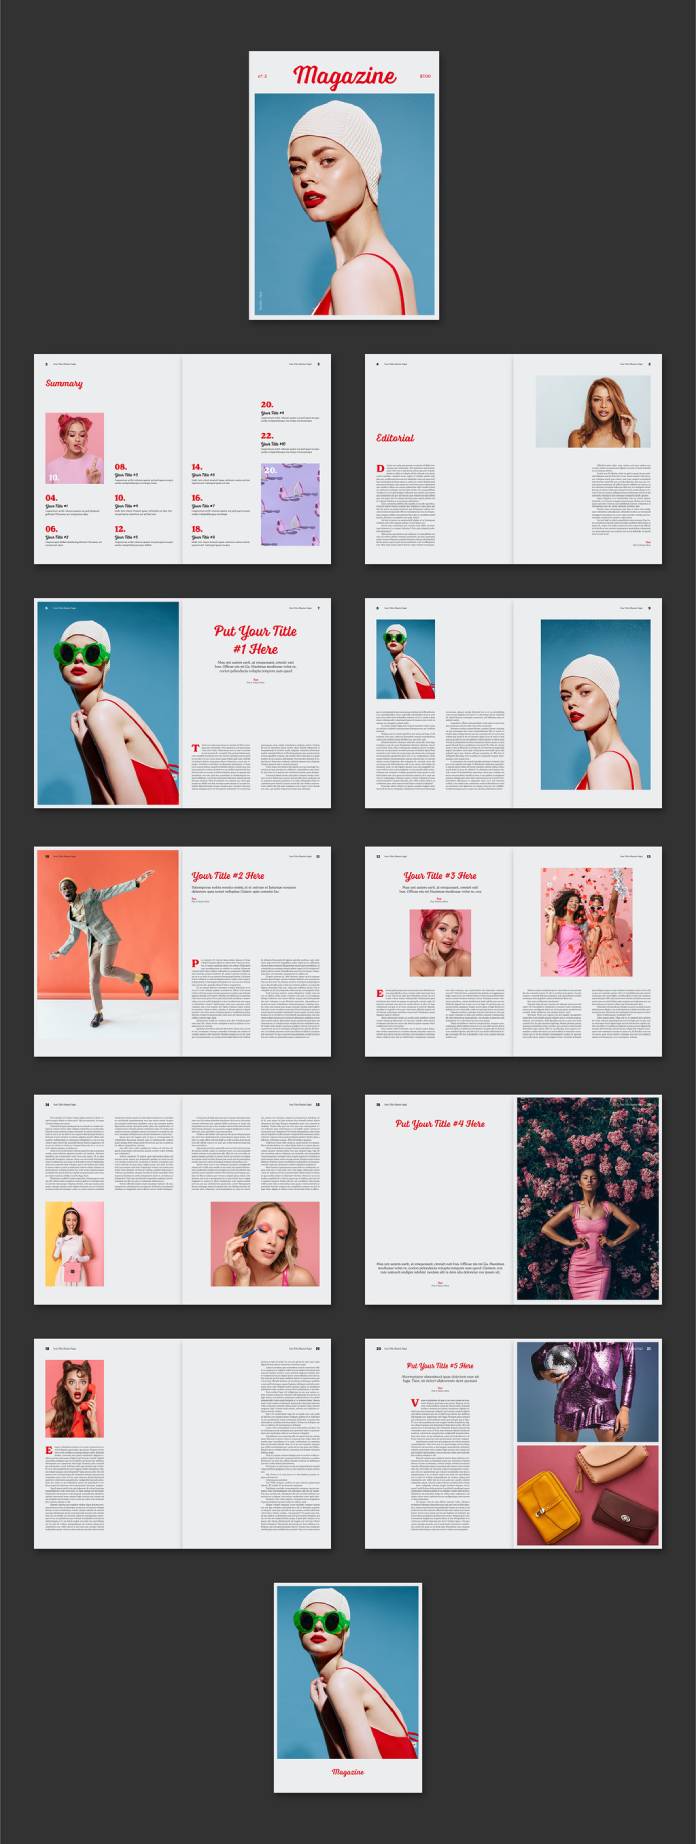 Colorful Magazine Template for Adobe InDesign,